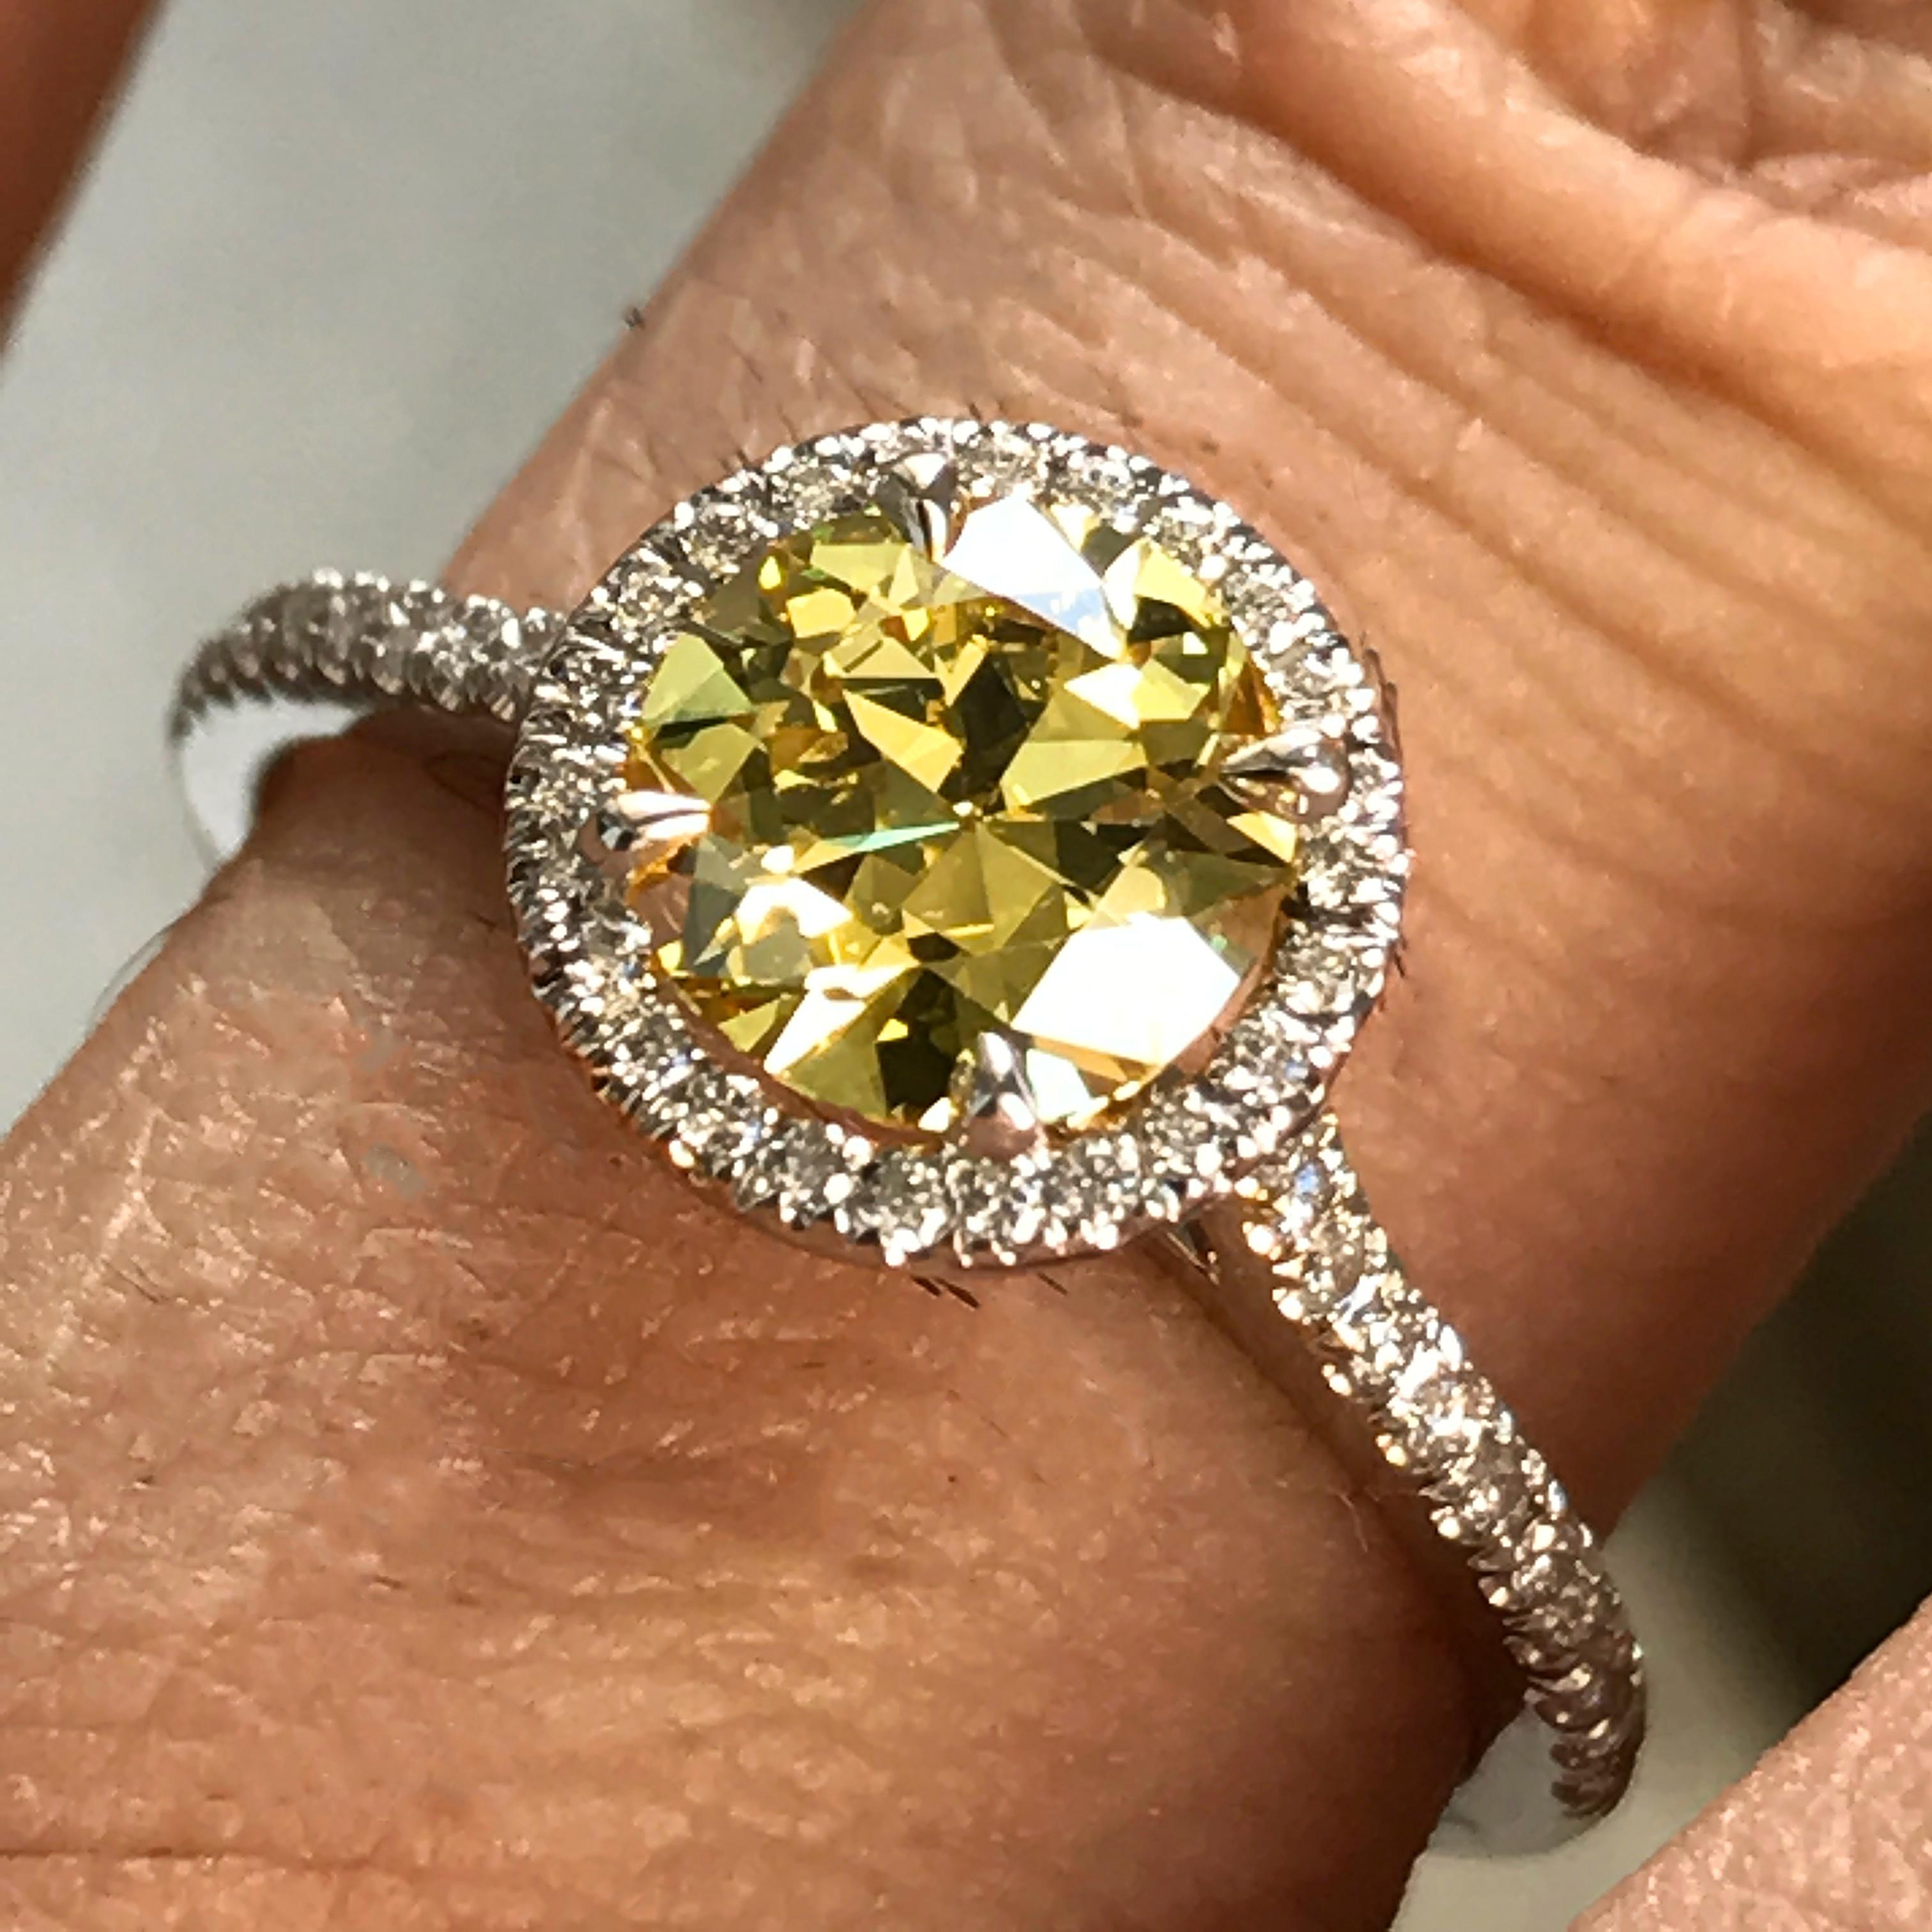 Round Cut Fancy Intense Yellow Diamond Engagement Ring 1.02 GIA Certified Diamond Halo For Sale